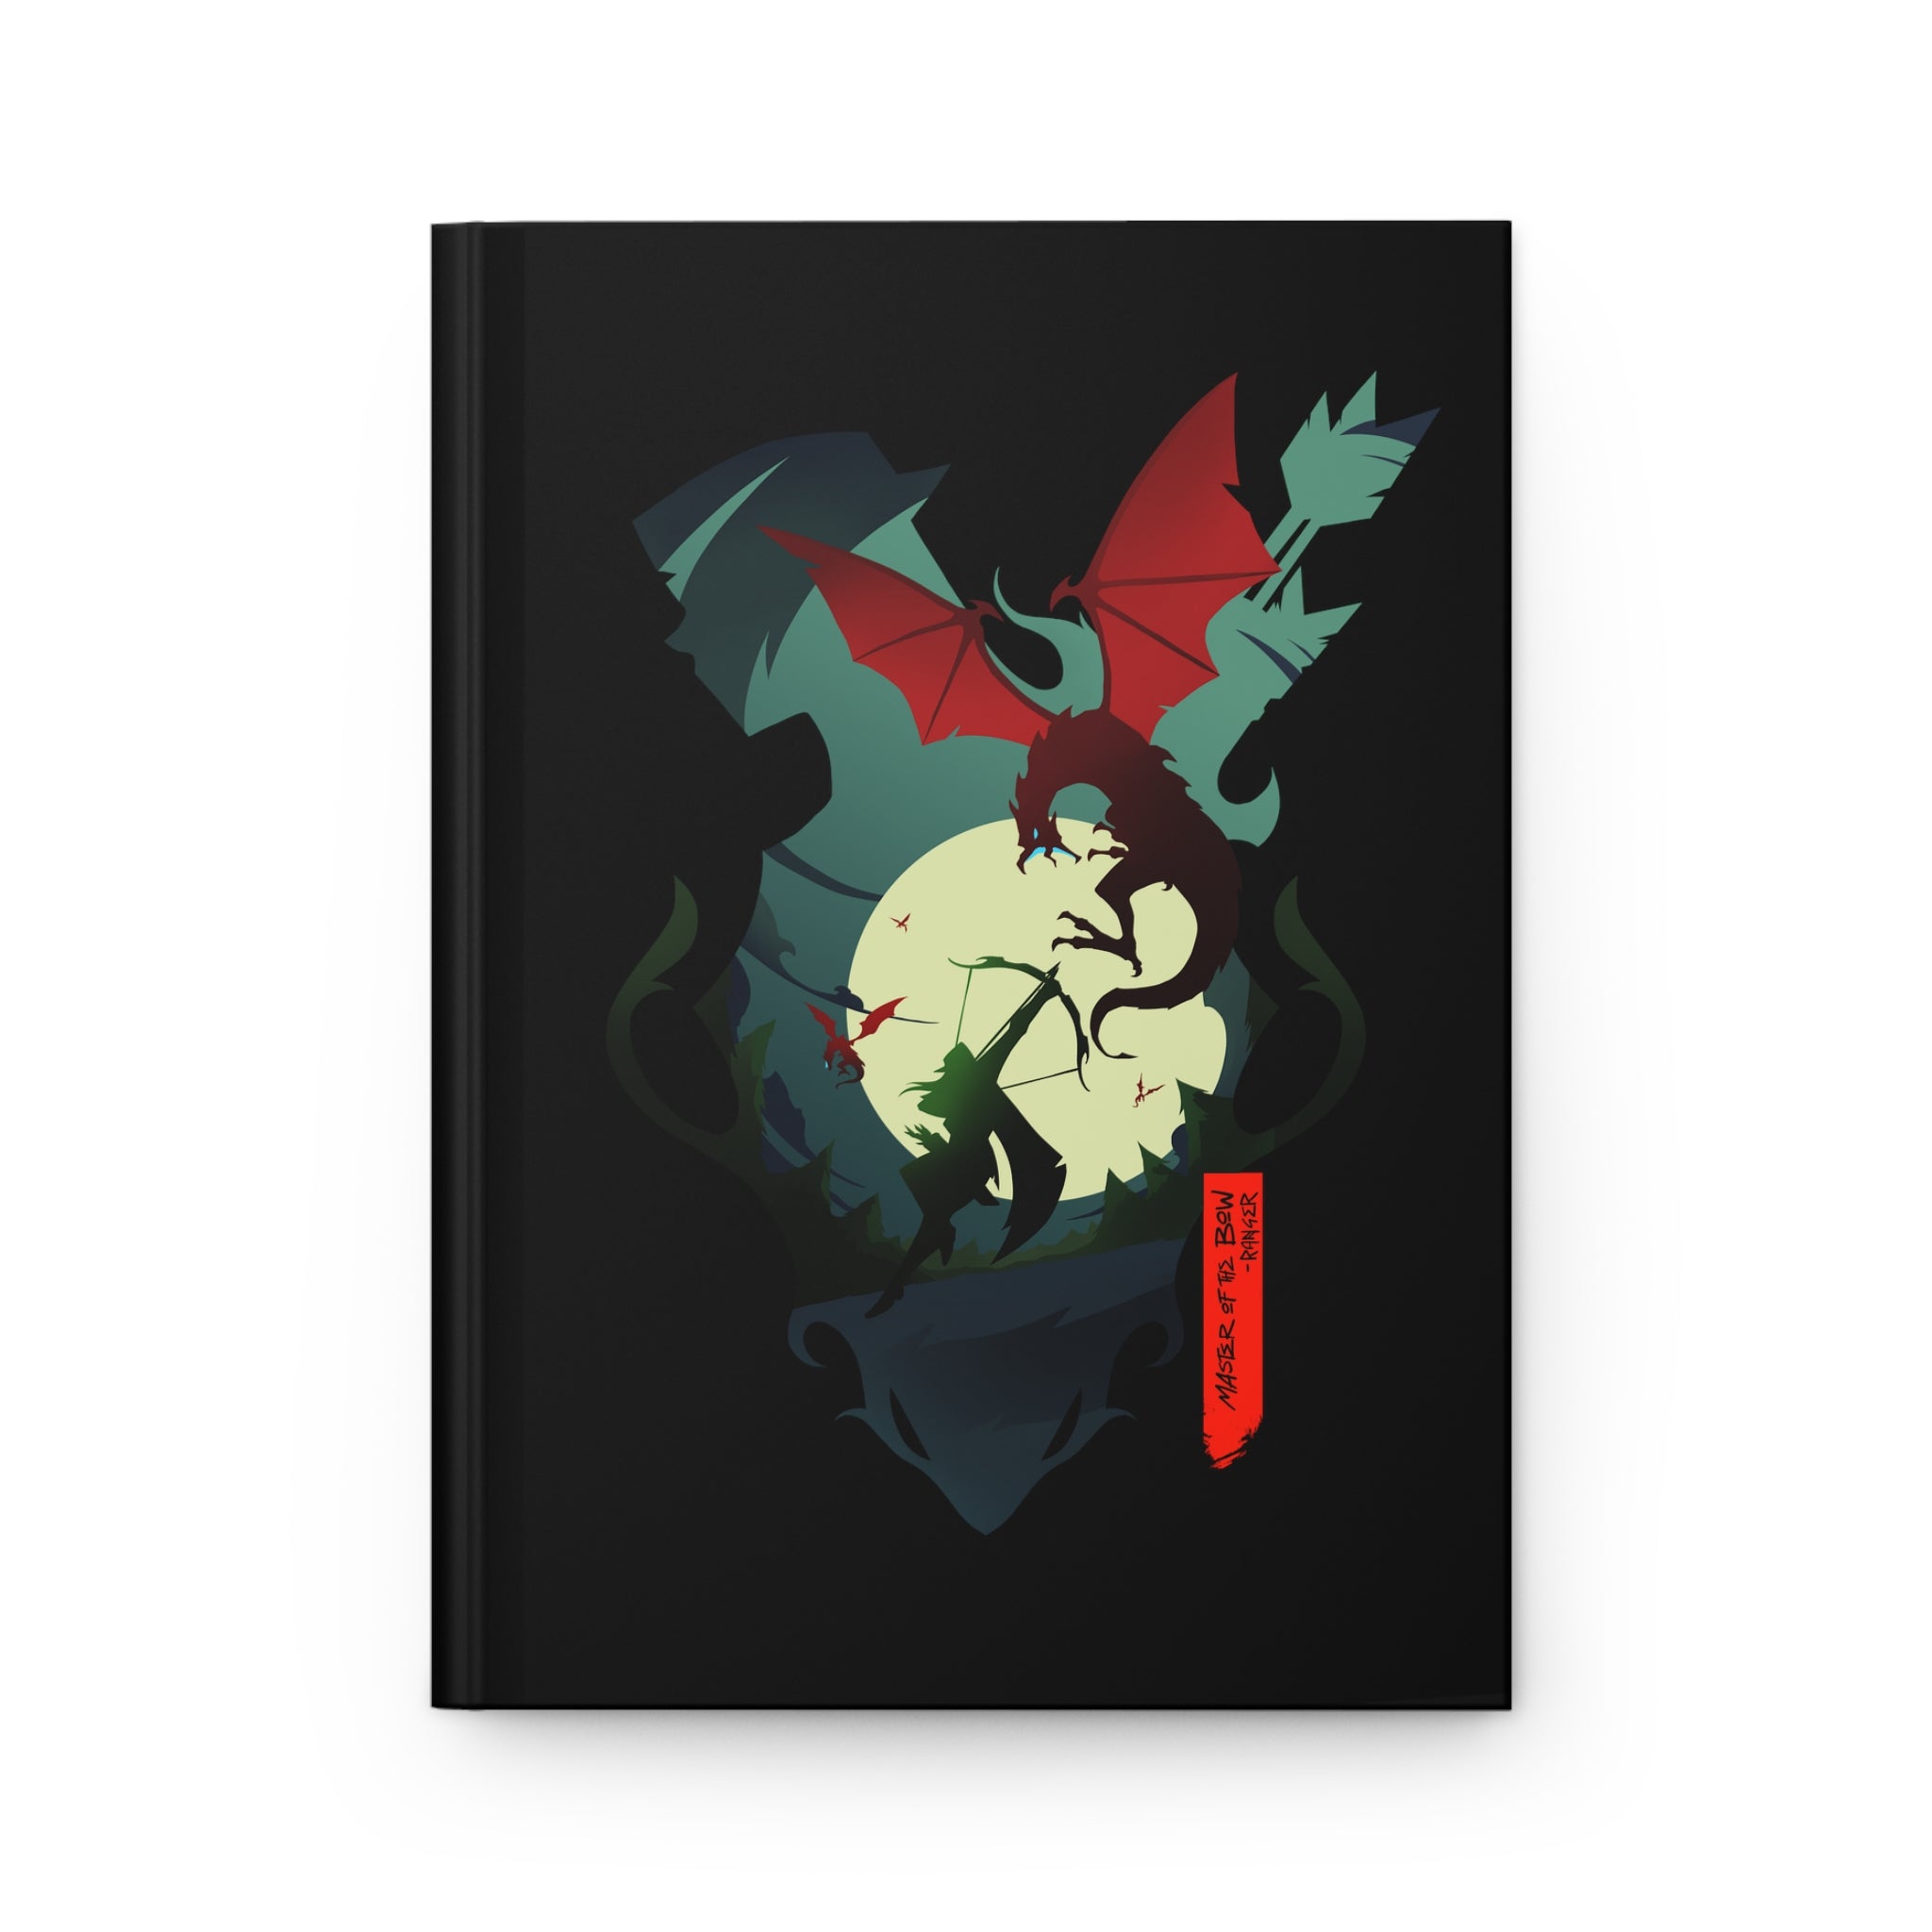 RANGER CLASS SILHOUETTE HARDCOVER CAMPAIGN JOURNAL